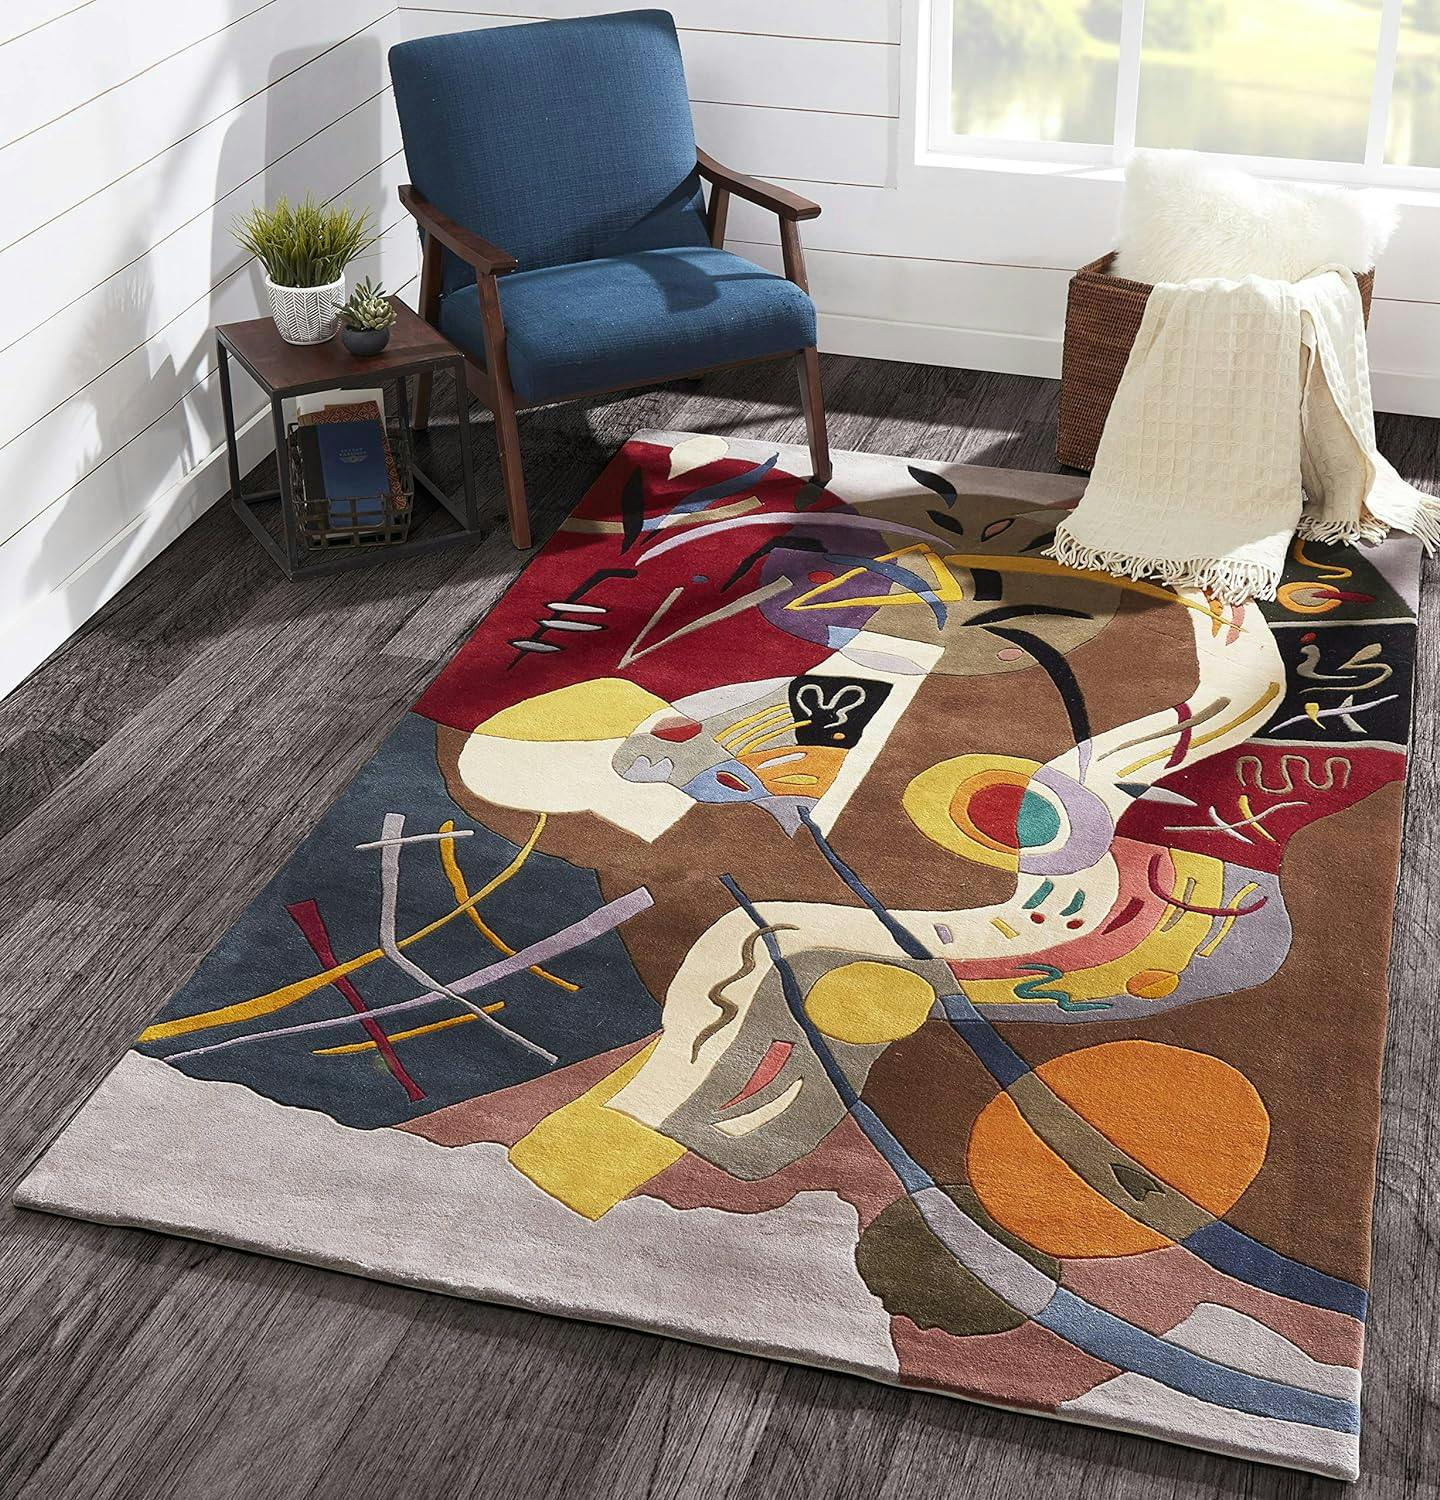 Modern Art Impressions Hand-Tufted Wool Area Rug, Multicolor 8' x 11'